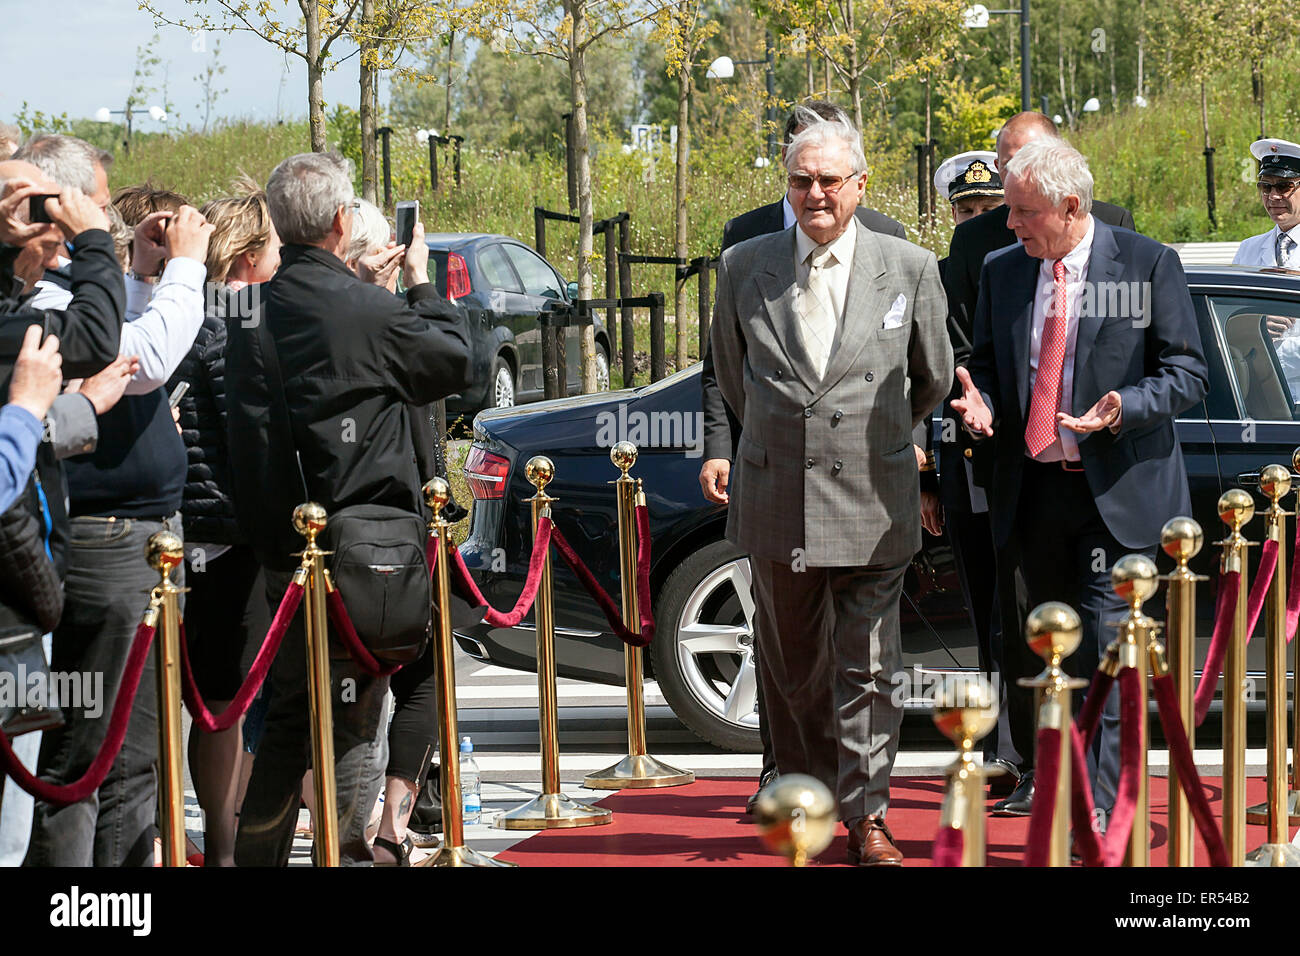 Hedehusene, Denmark, May 27th, 2015: Prince Concort Henrik (2nd, R) arrives to DSV’s new head quarter in Hedehuene near Copenhagen. The Prince Concort reveiled his new sculpture, “The Creative Hand”, which stands near the entrence to DSV. At the photo he is followed by DSV chairman, Kurt Larsen (1st, R) Credit:  OJPHOTOS/Alamy Live News Stock Photo